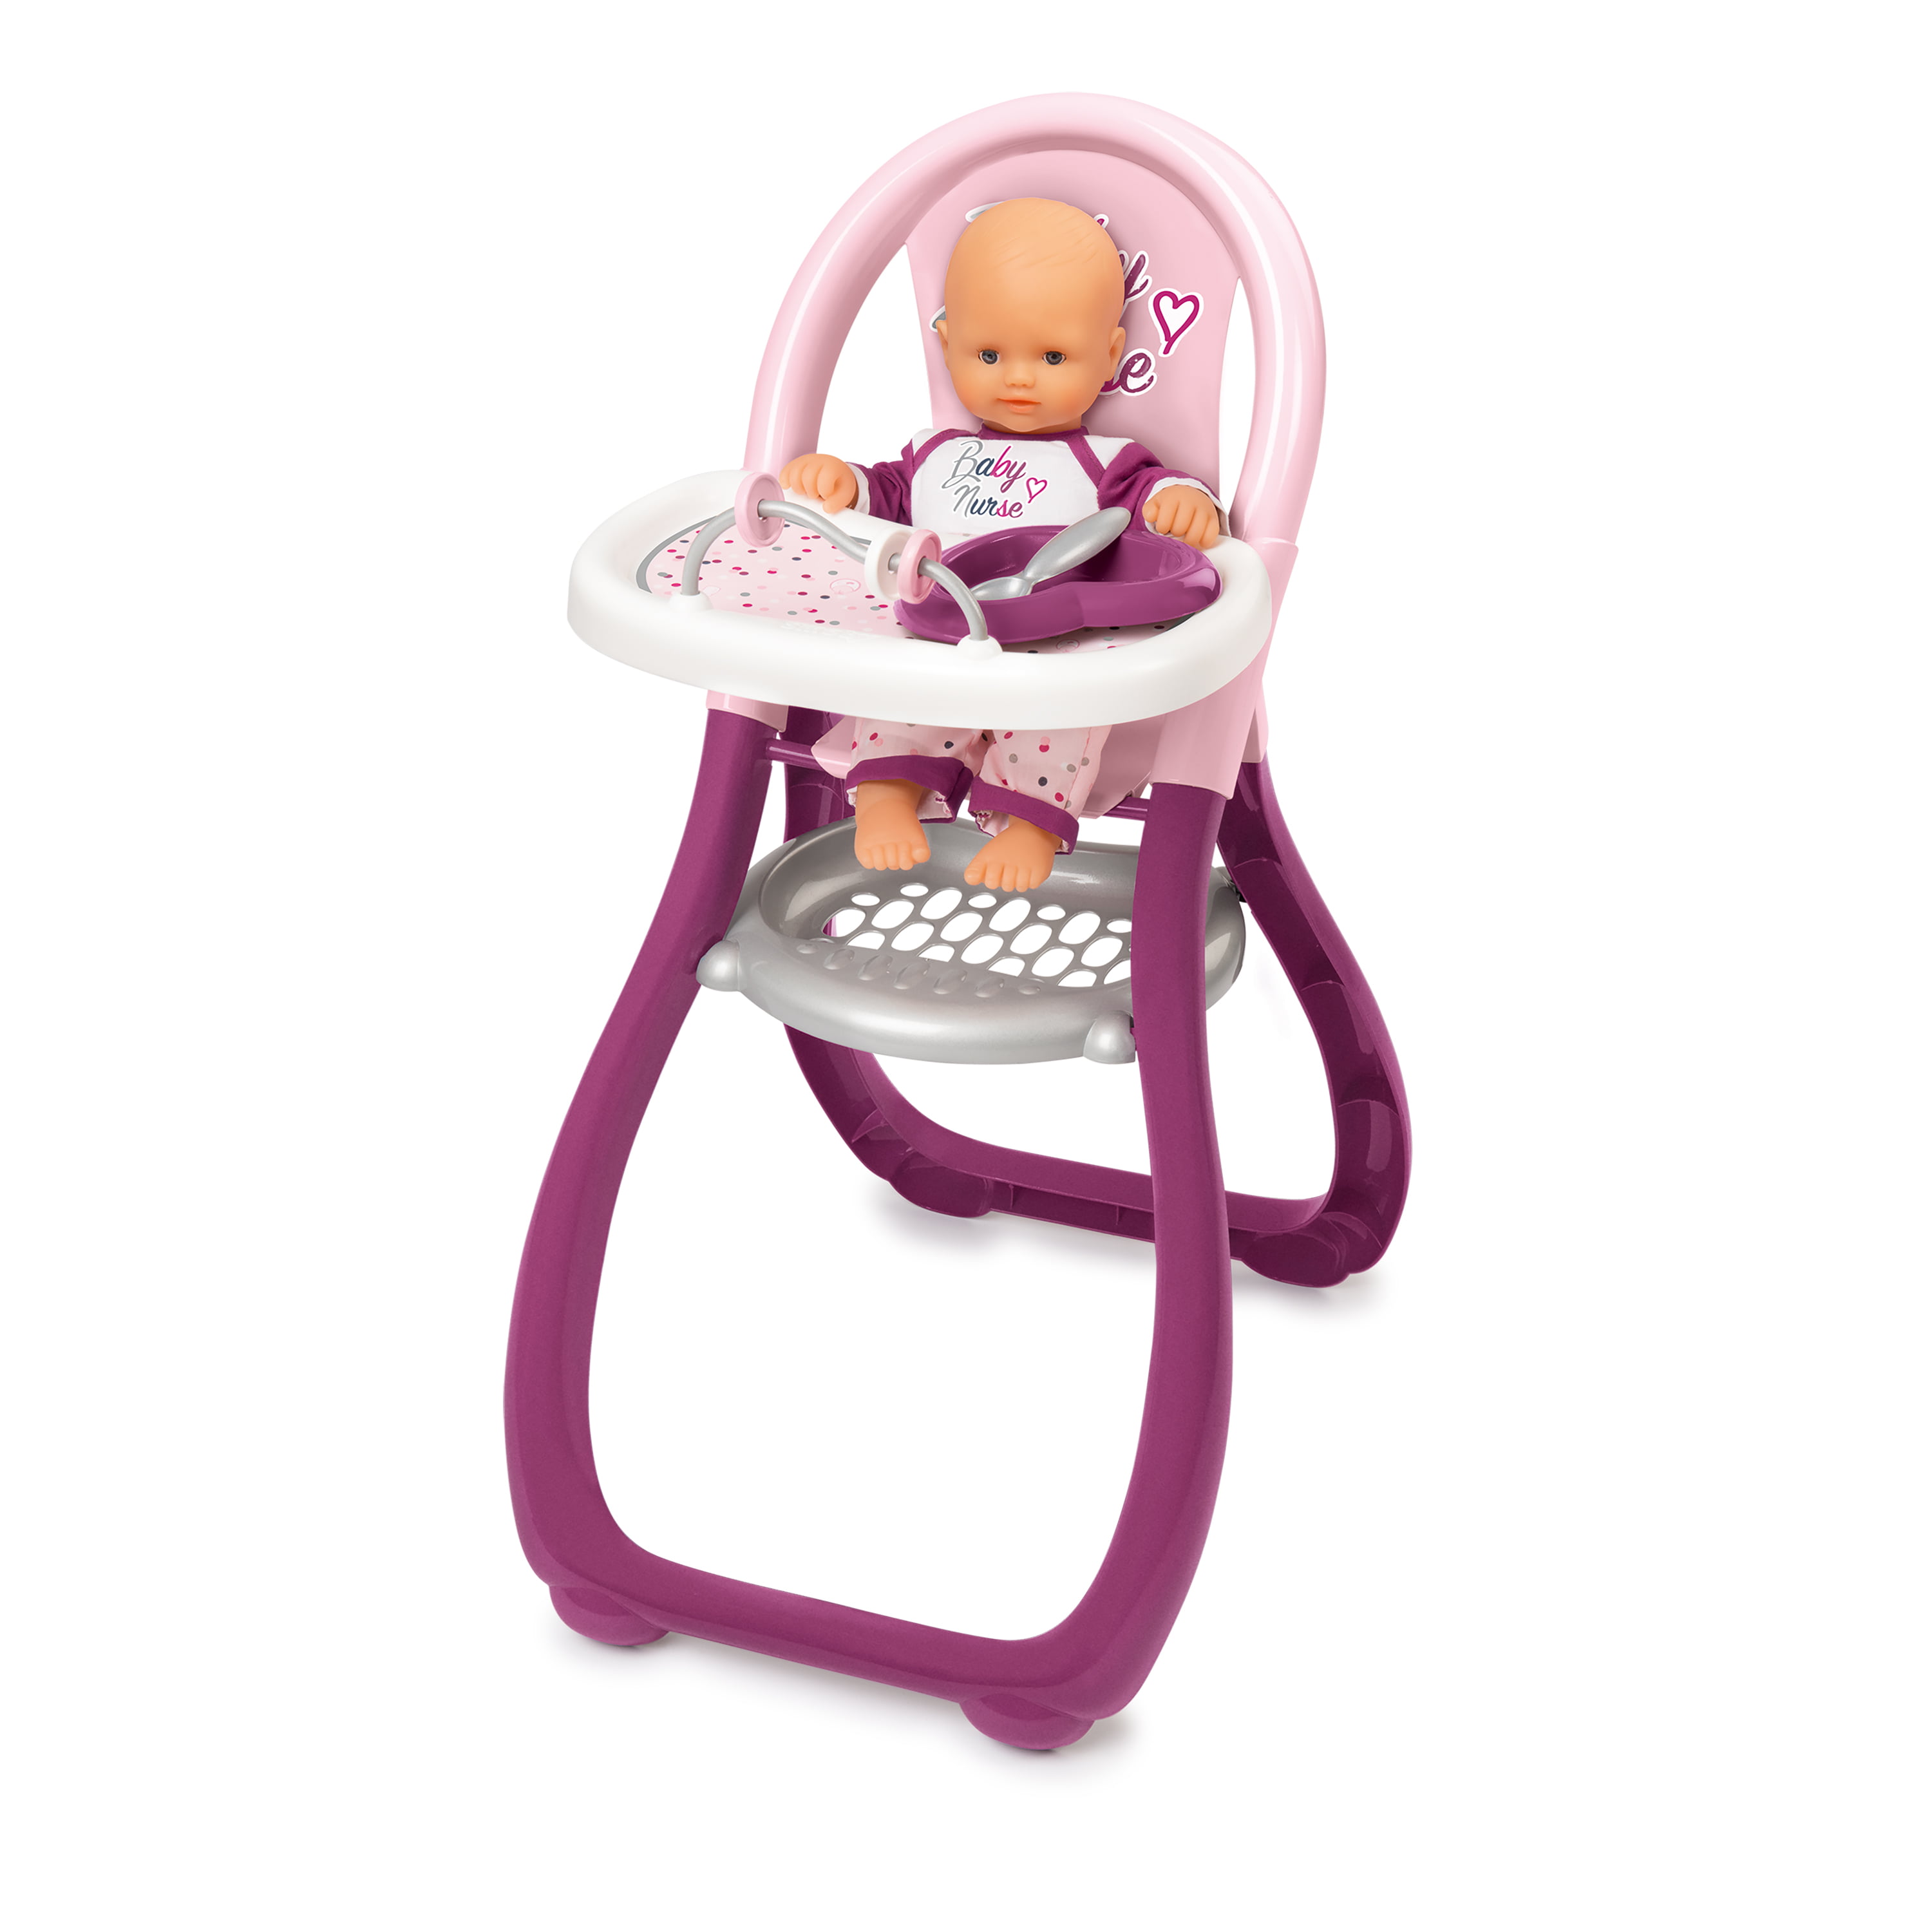 Little Smoby Baby seat